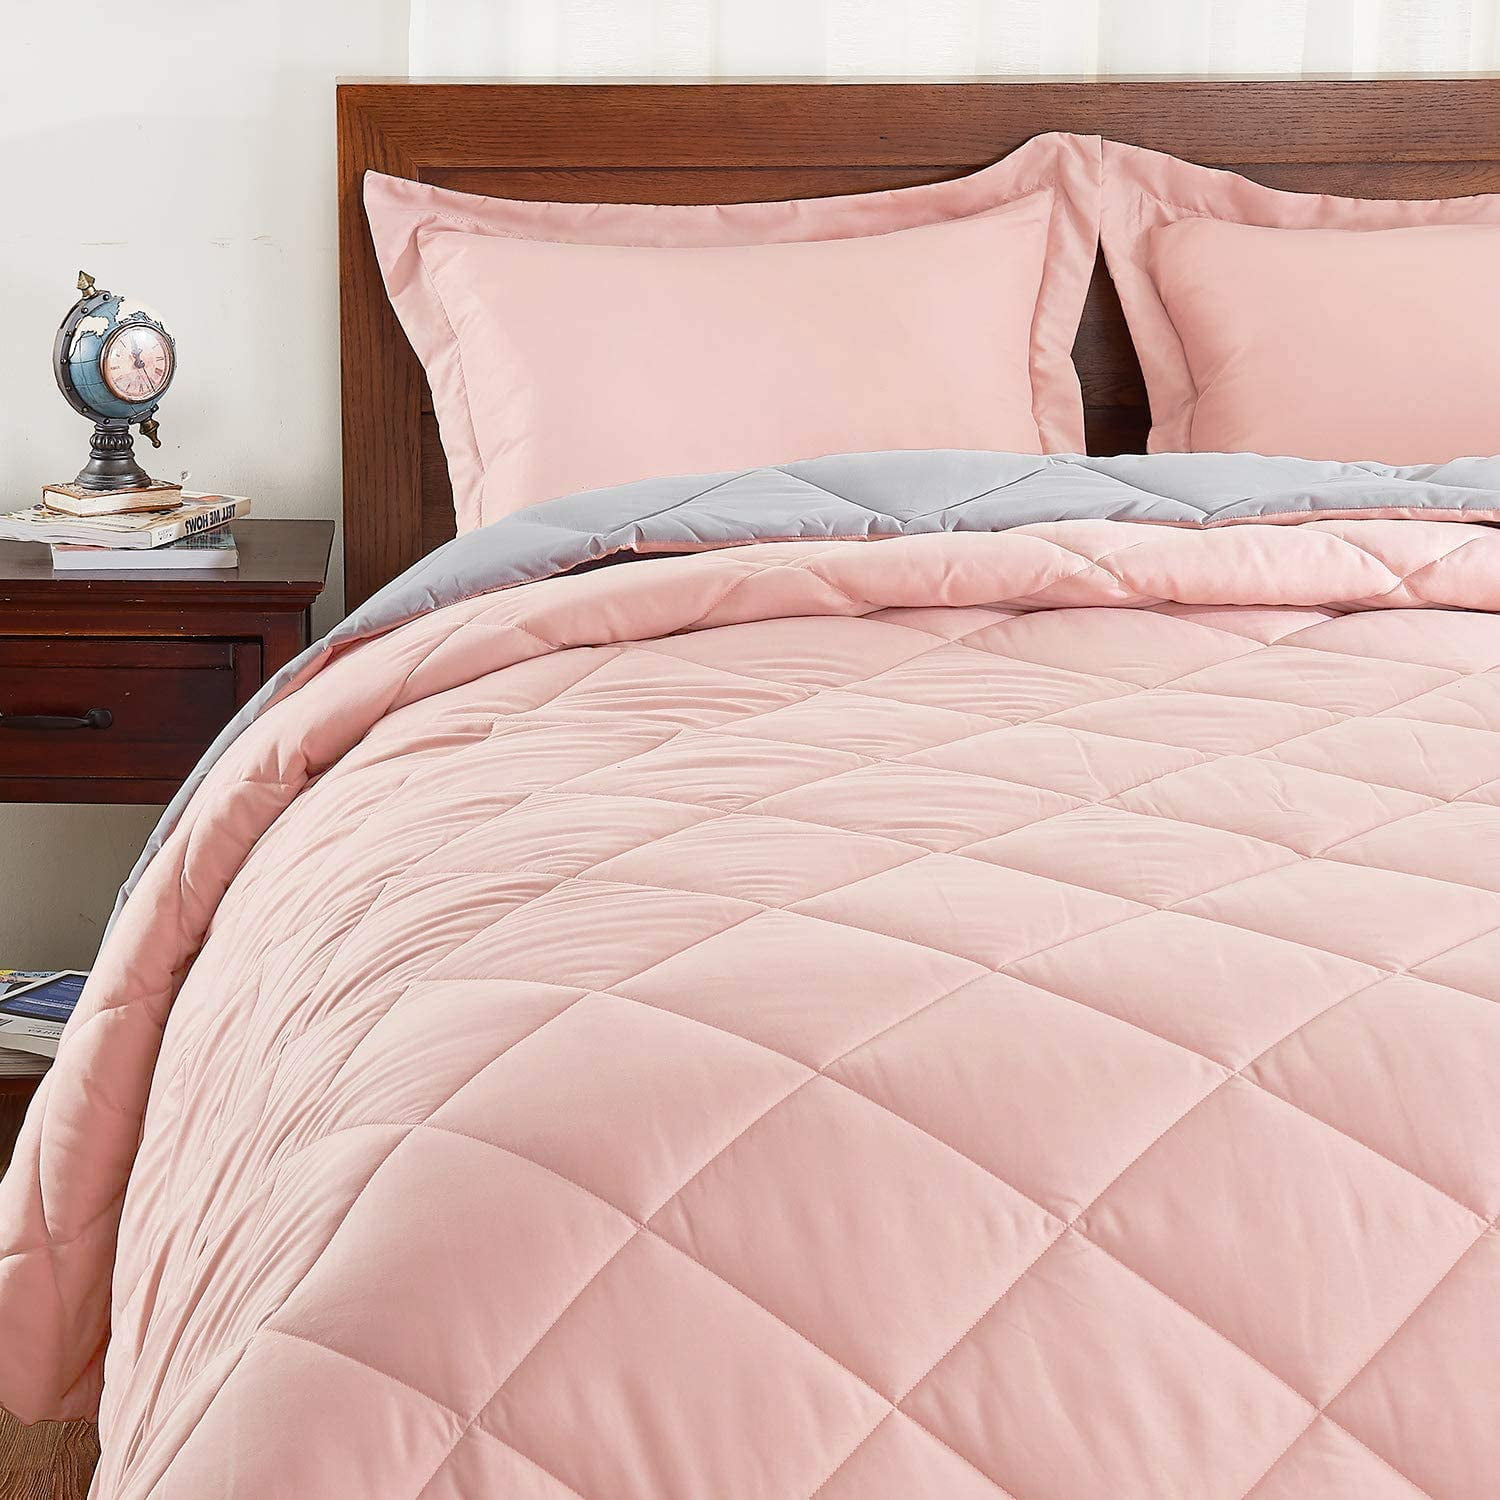 Reversible Bed Comforter for All Seasons with 1 Pillow Sham Basic Beyond Down Alternative Comforter Set Twin, Coral/Grey